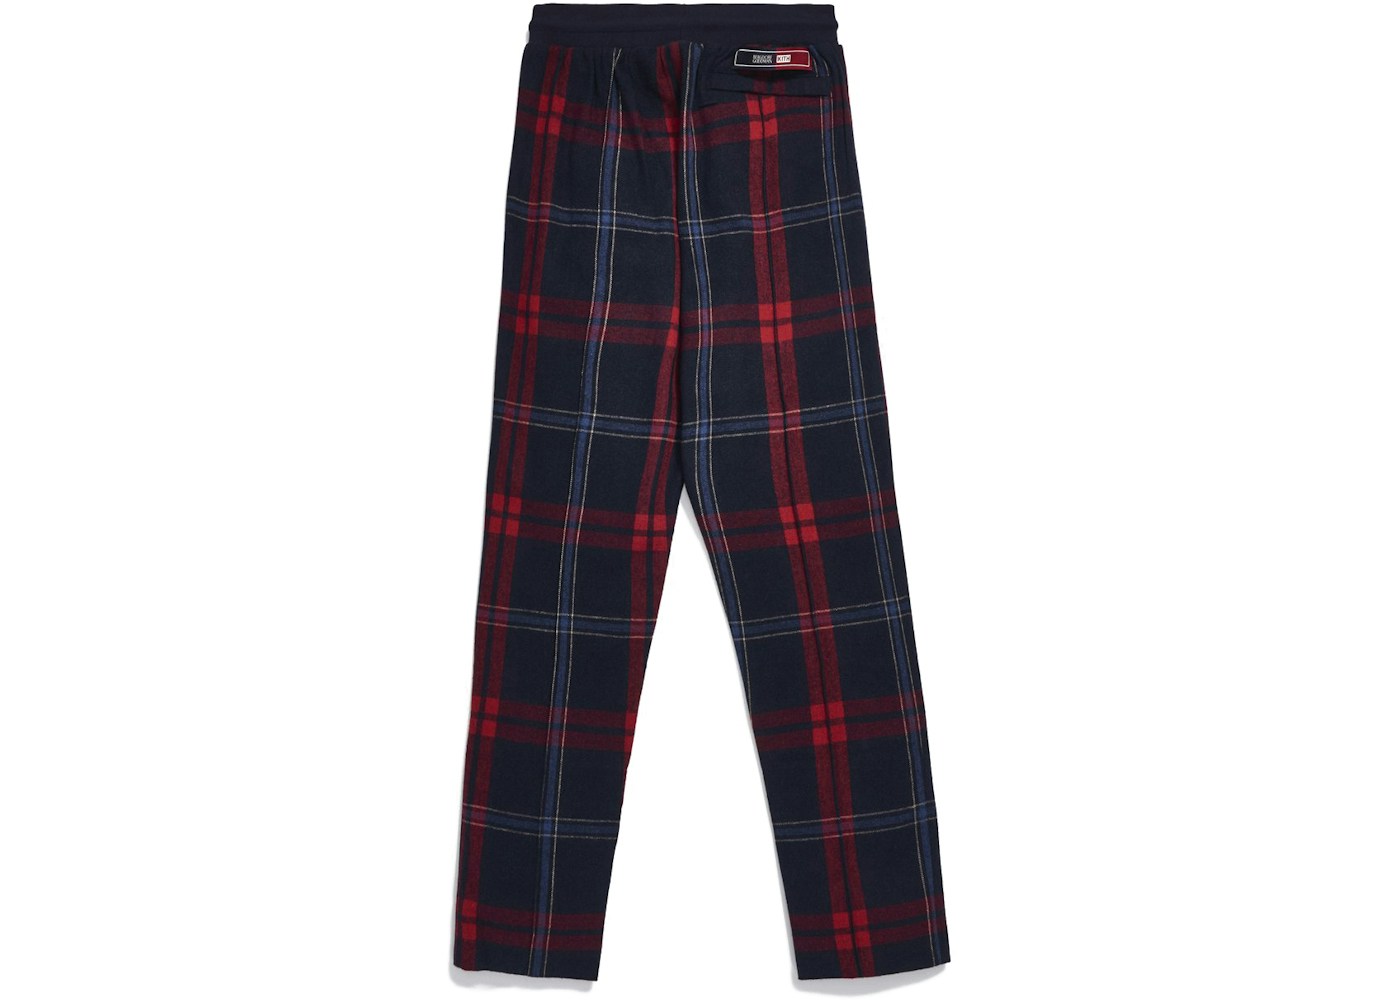 Kith for Bergdorf Goodman Lewis Track Pant Navy/Blue Plaid - FW20